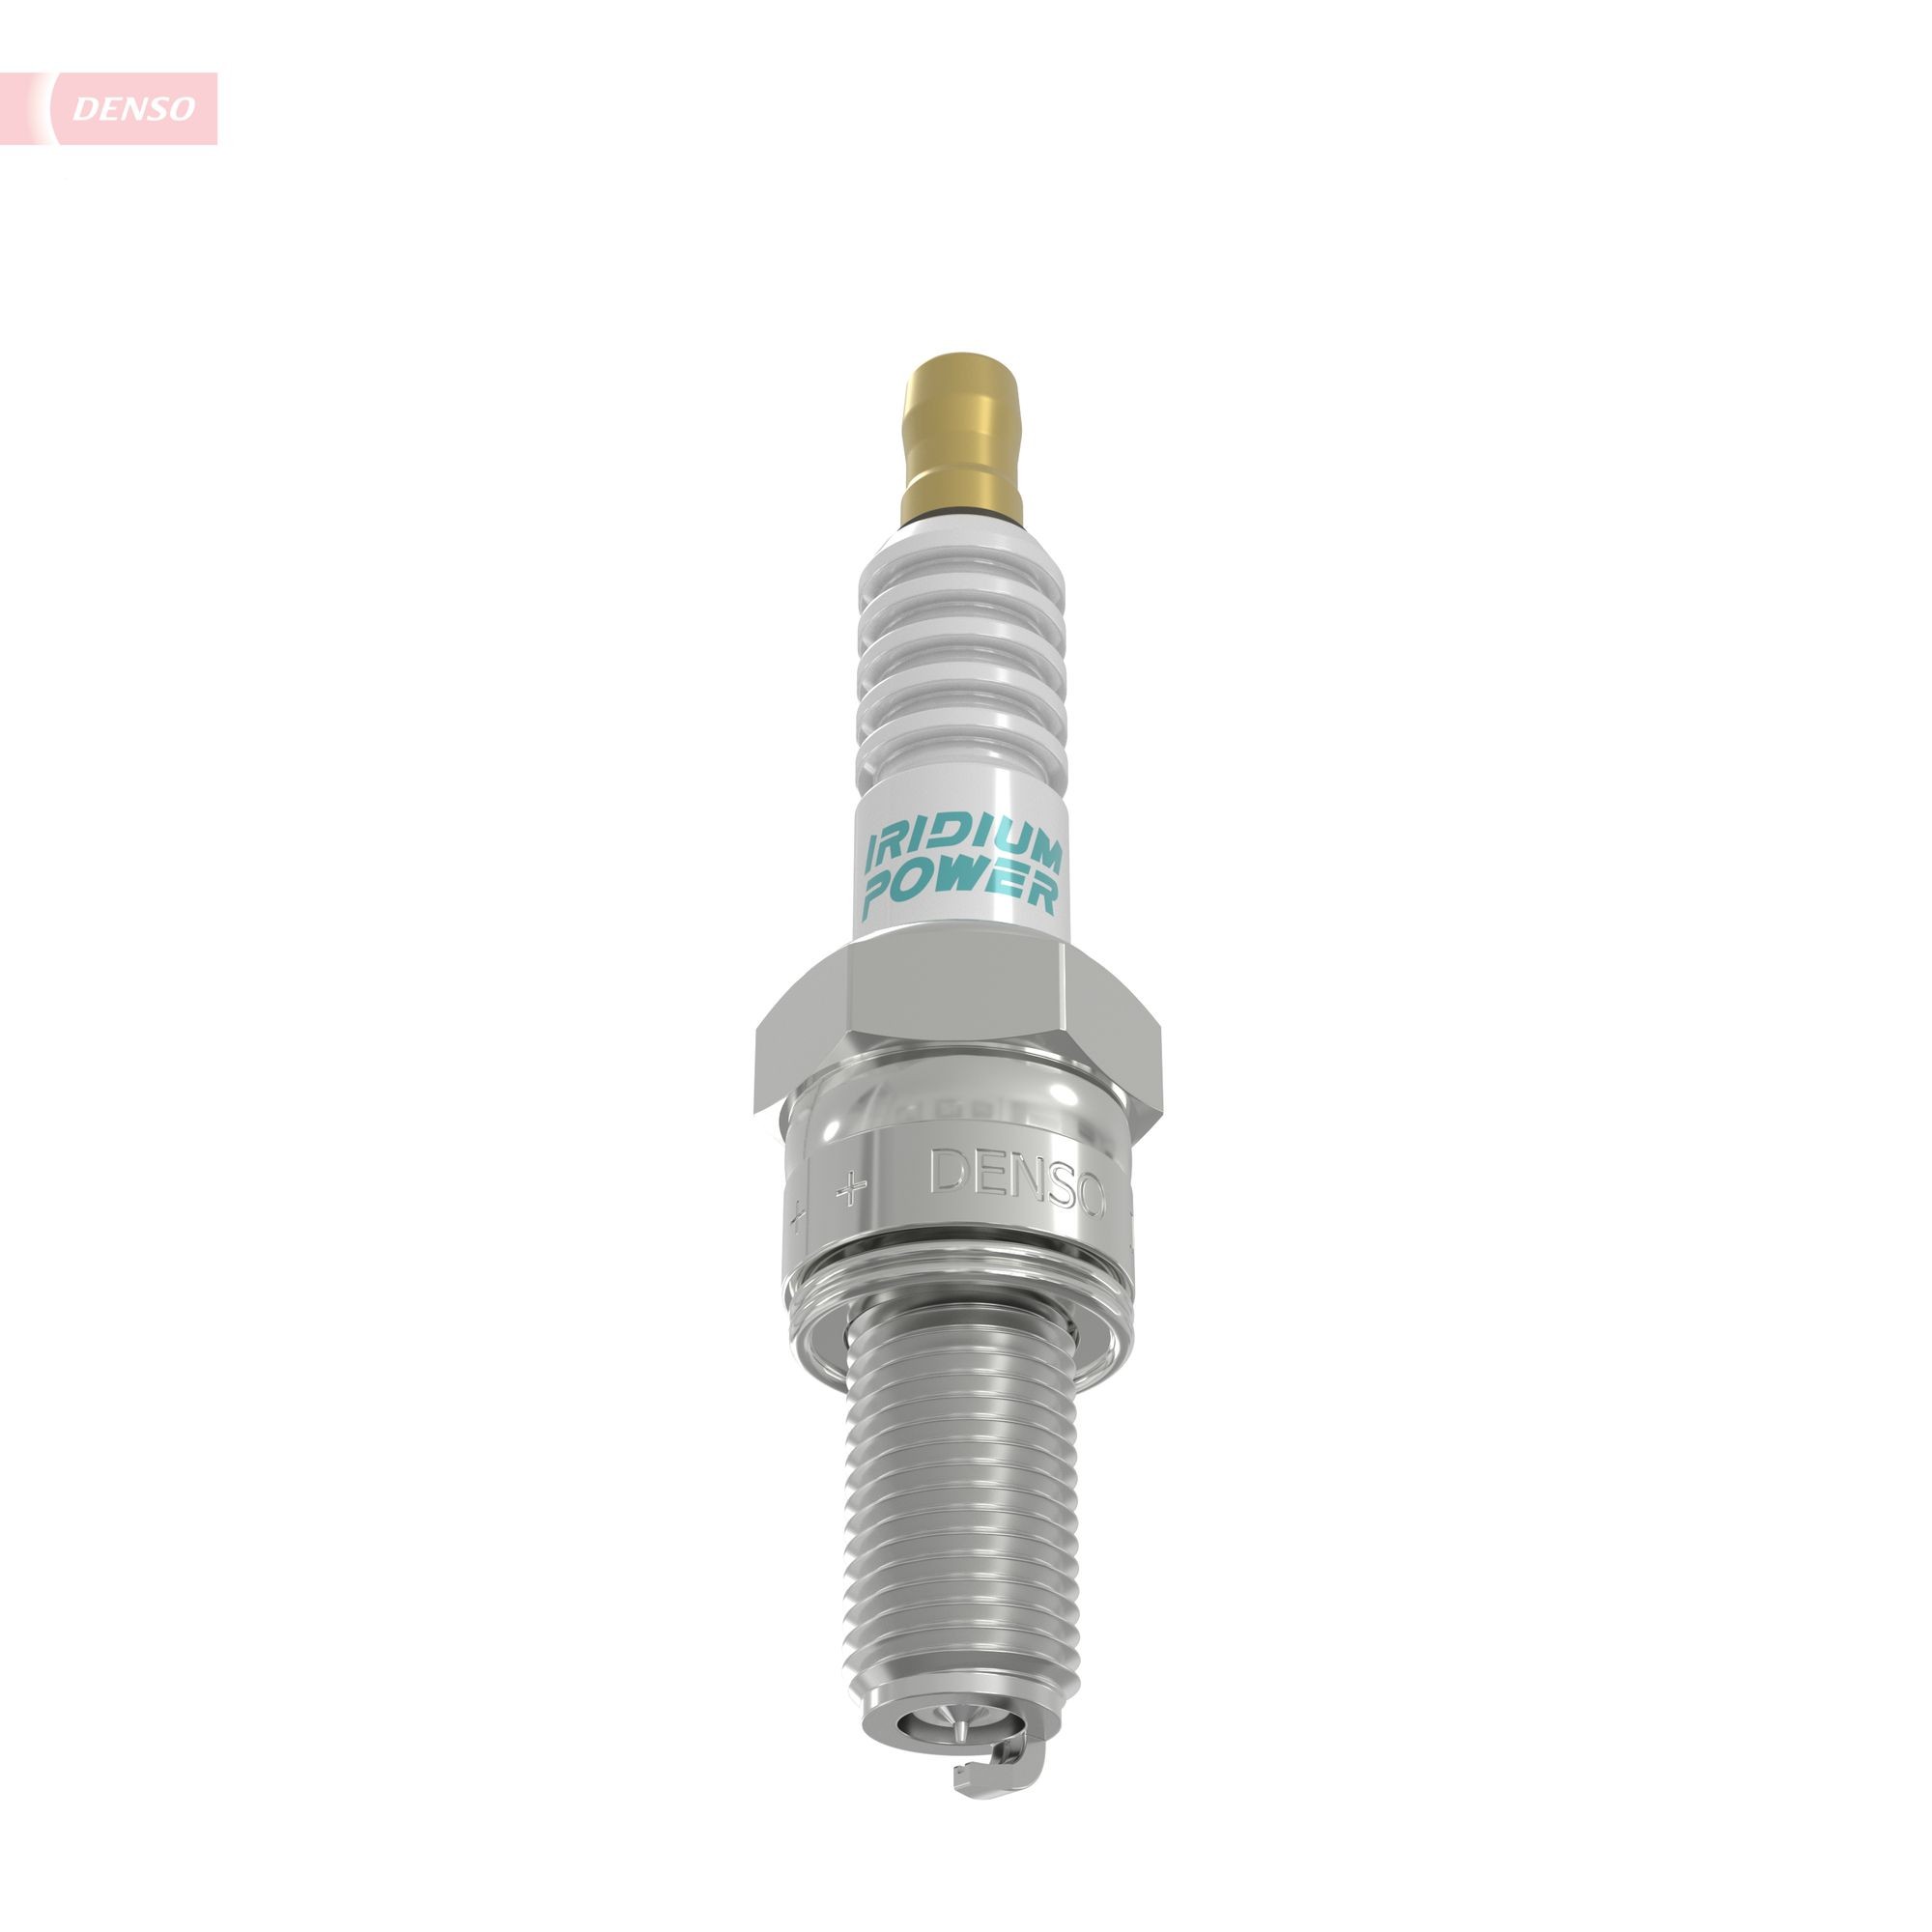 DENSO Spark plugs 5363 buy online